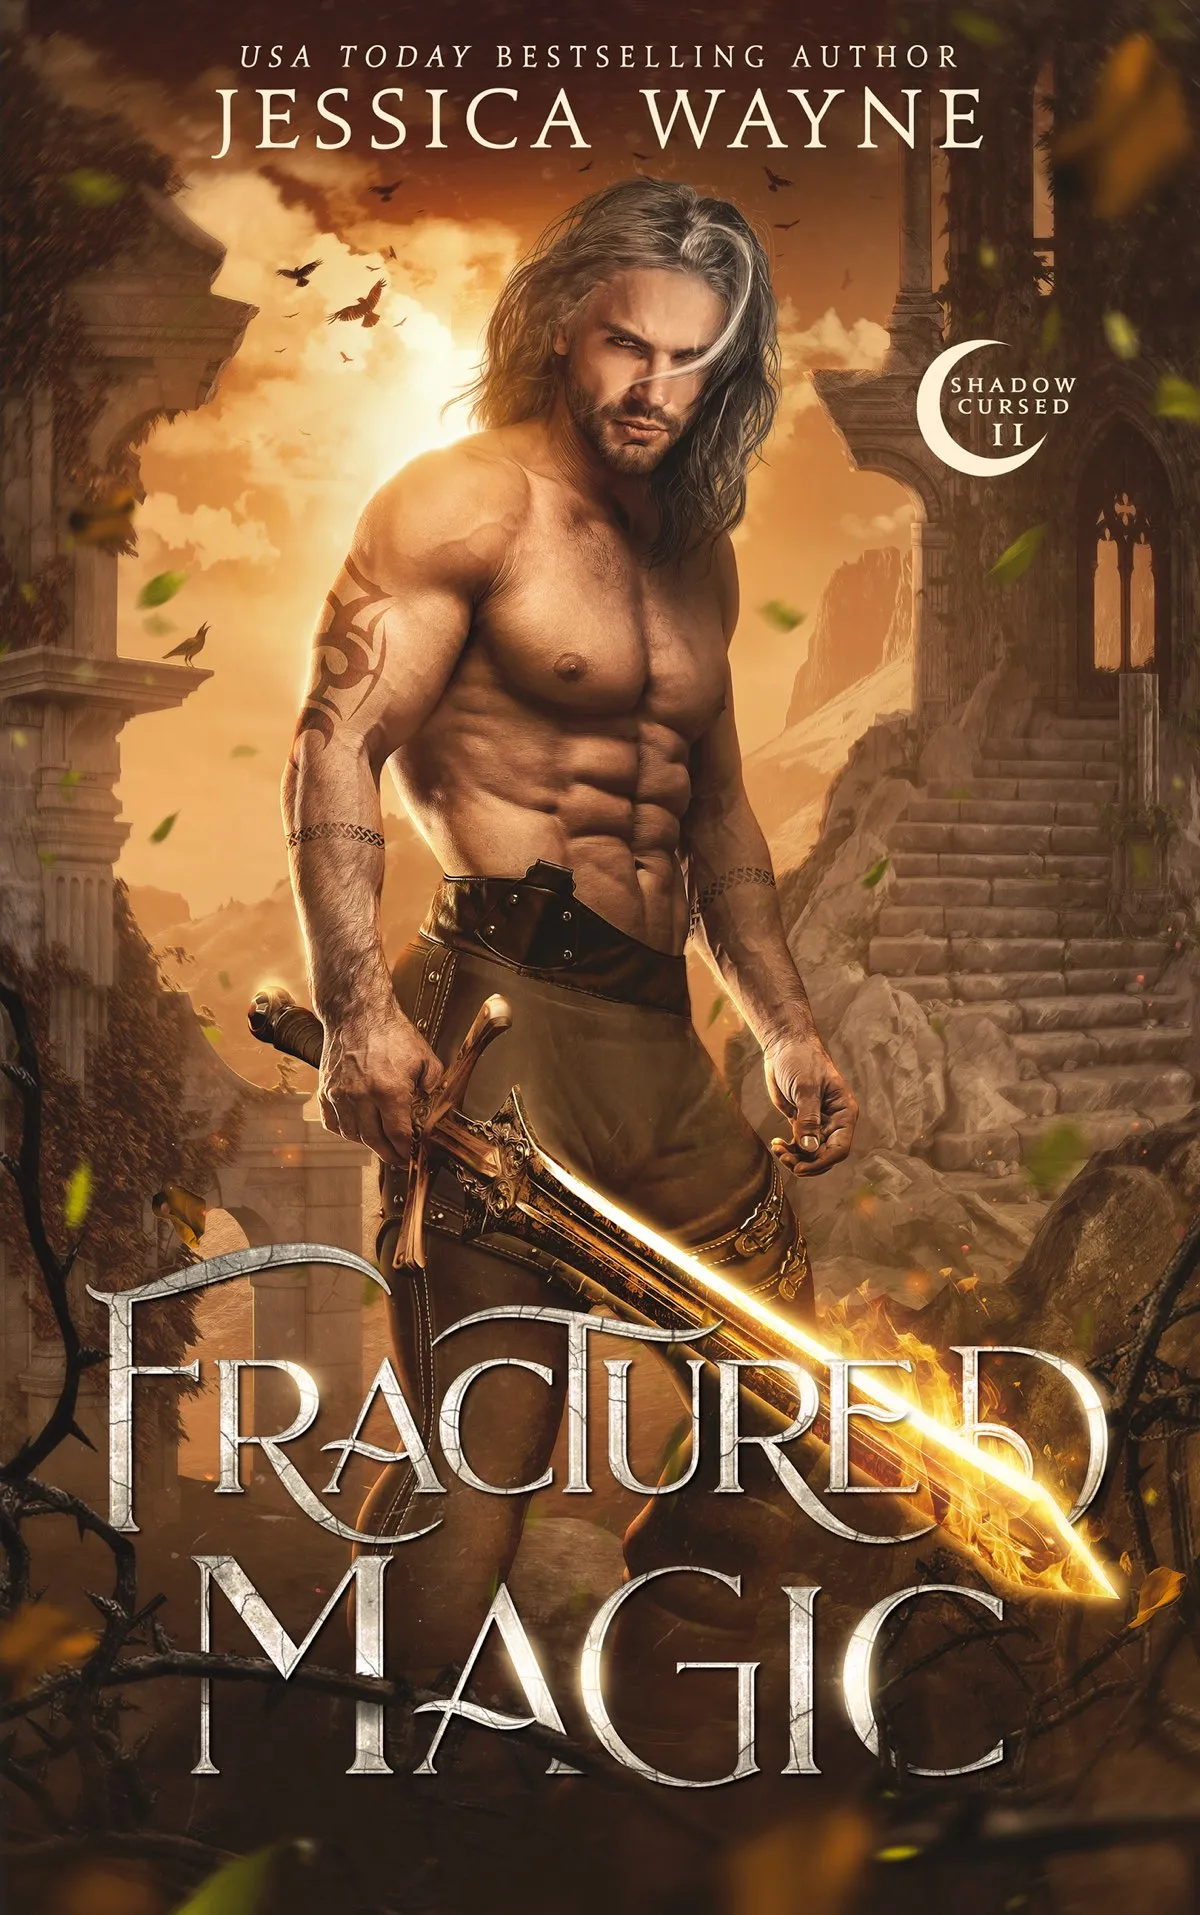 Fractured Magic (Shadow Cursed #2)